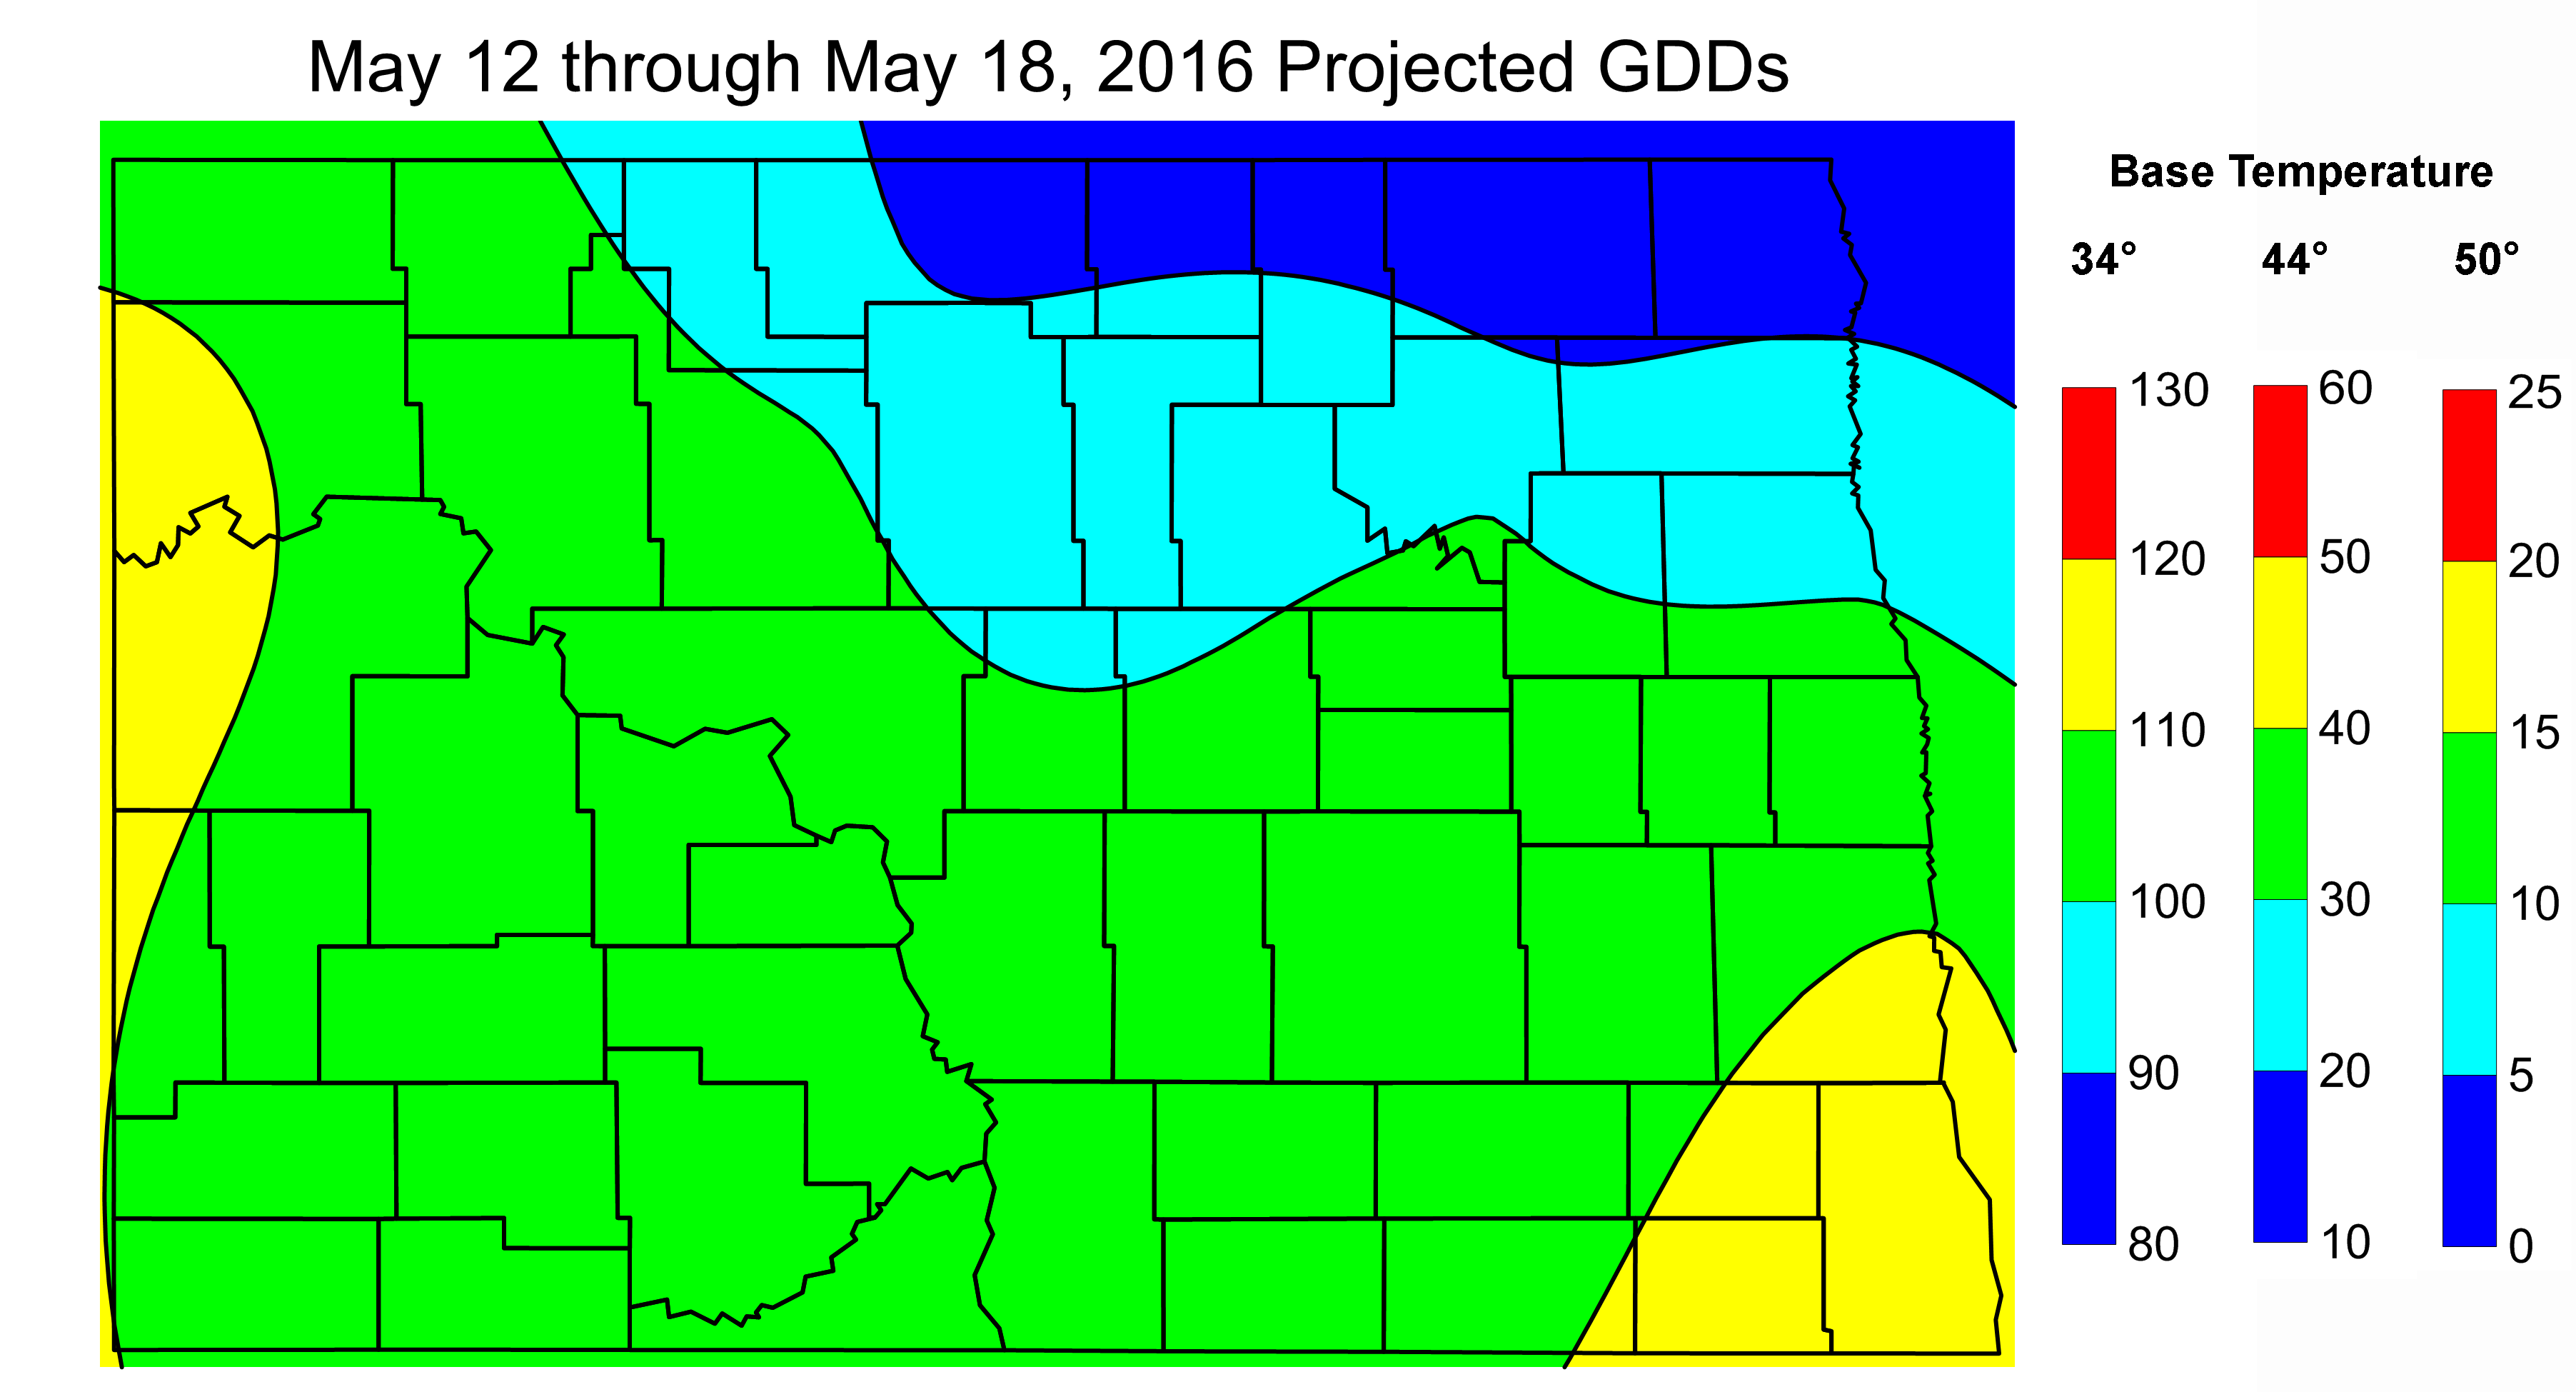 Figure 2. Projected Growing Degree Days from May 12 through May 18, 2016